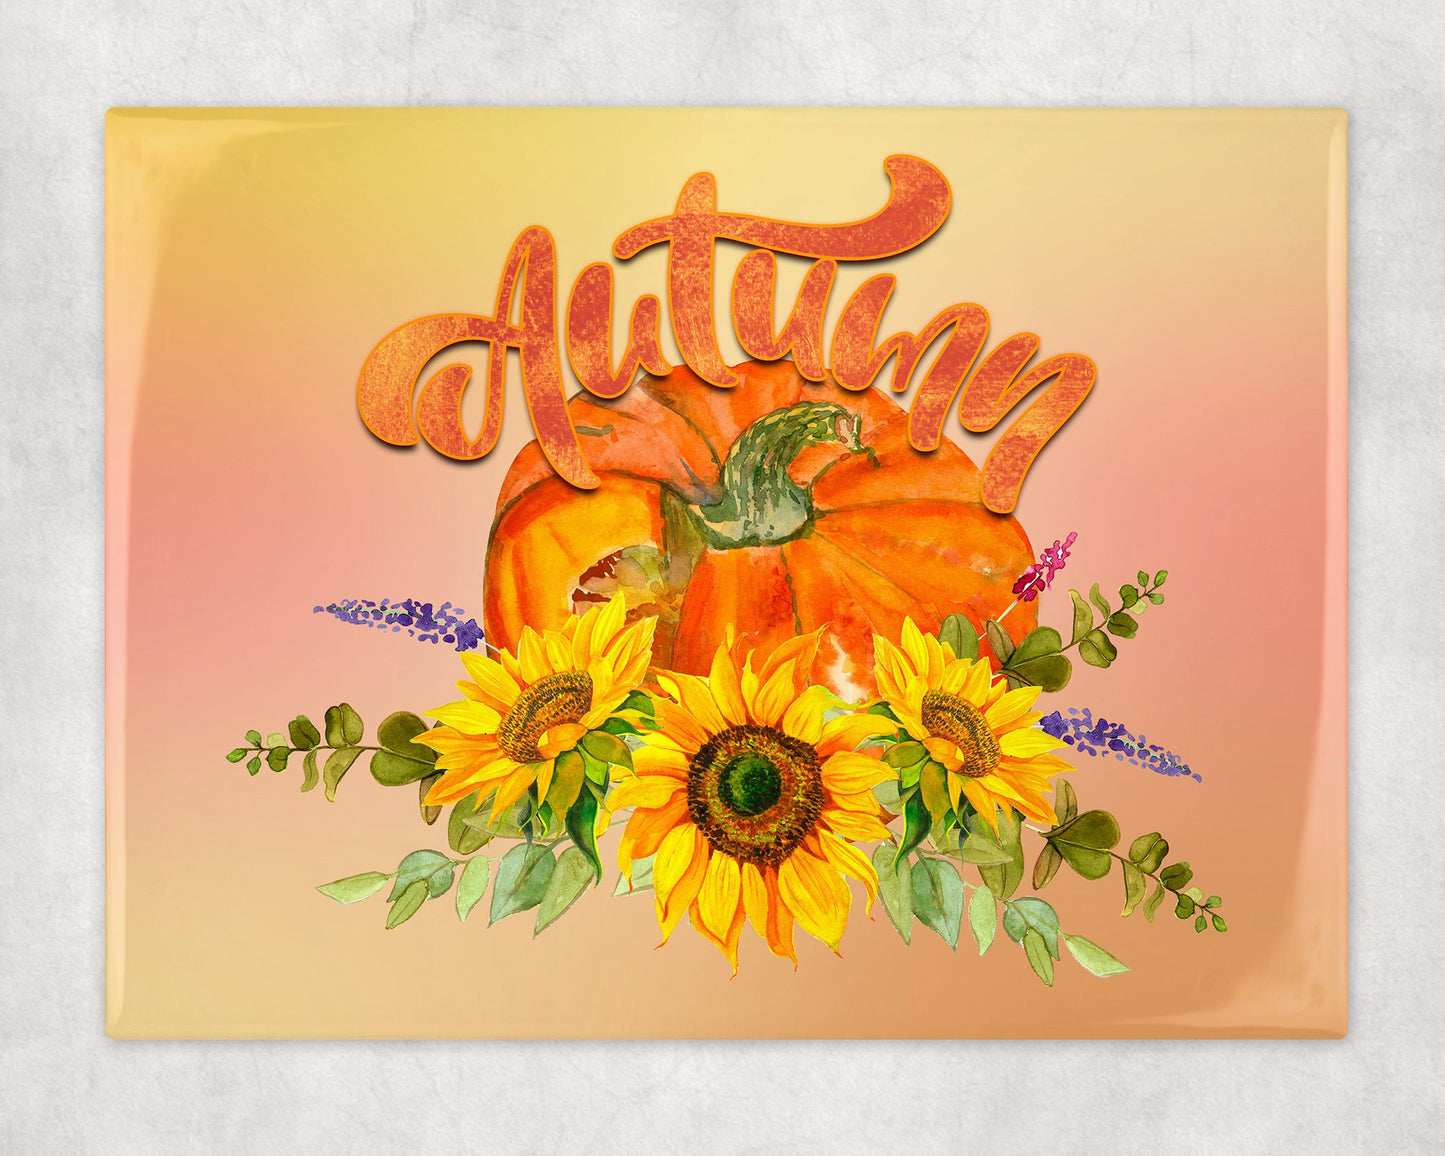 Autumn Pumpkin and Sunflowers Art Decorative Ceramic Tile with Easel Back - 6x8 inches